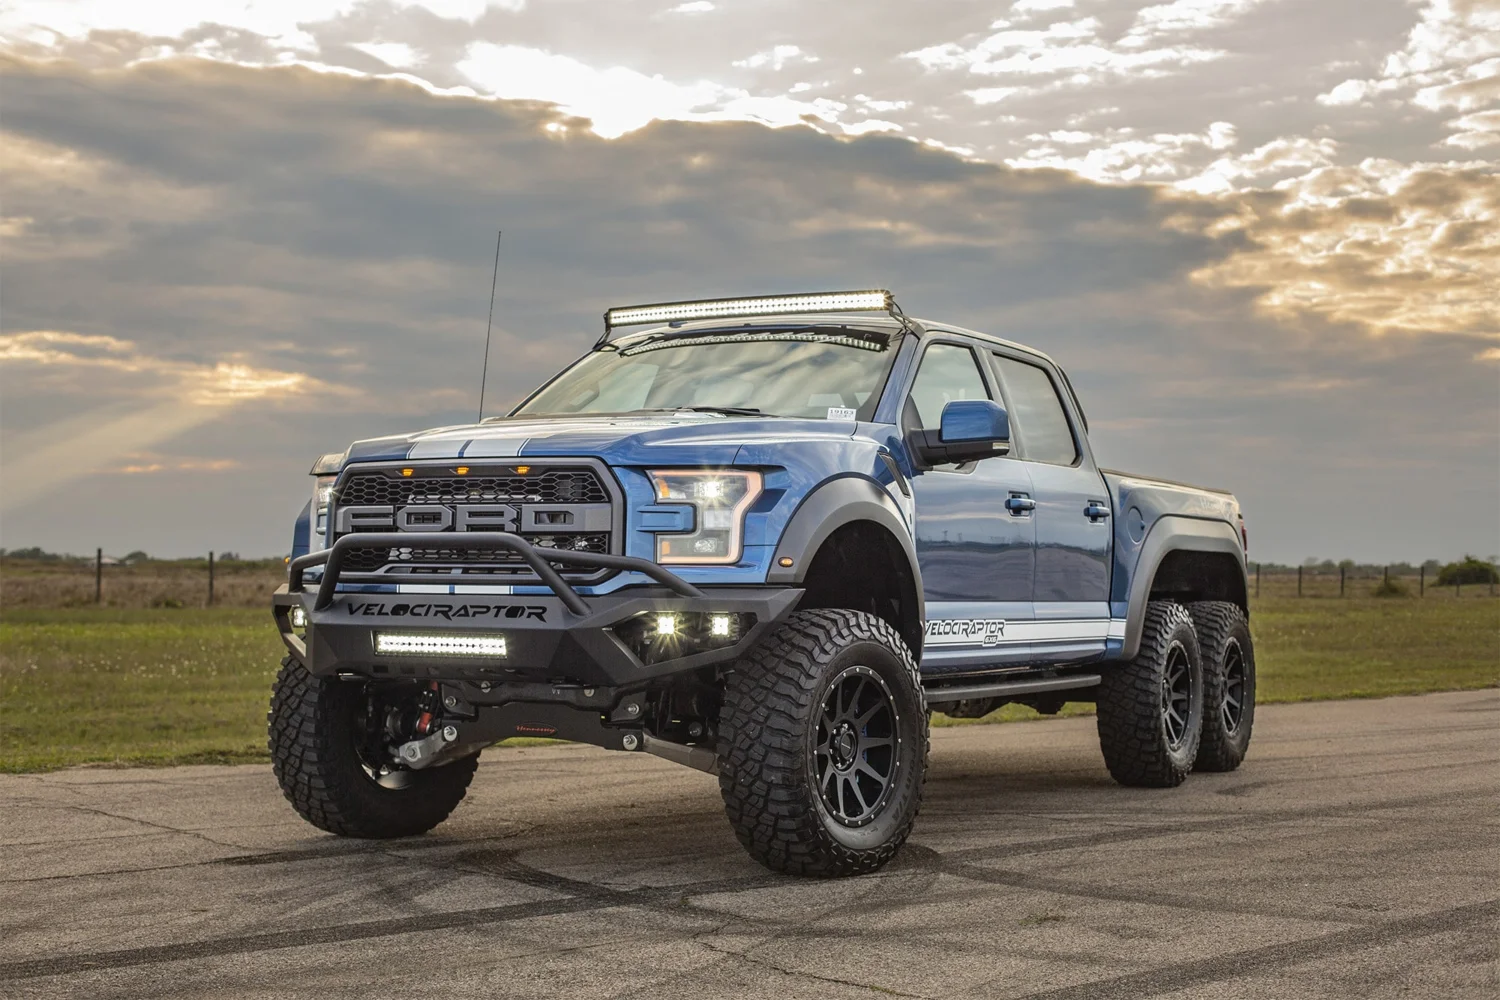 The $499,999 Ford F-150 VelociRaptor is a six-wheel monster truck